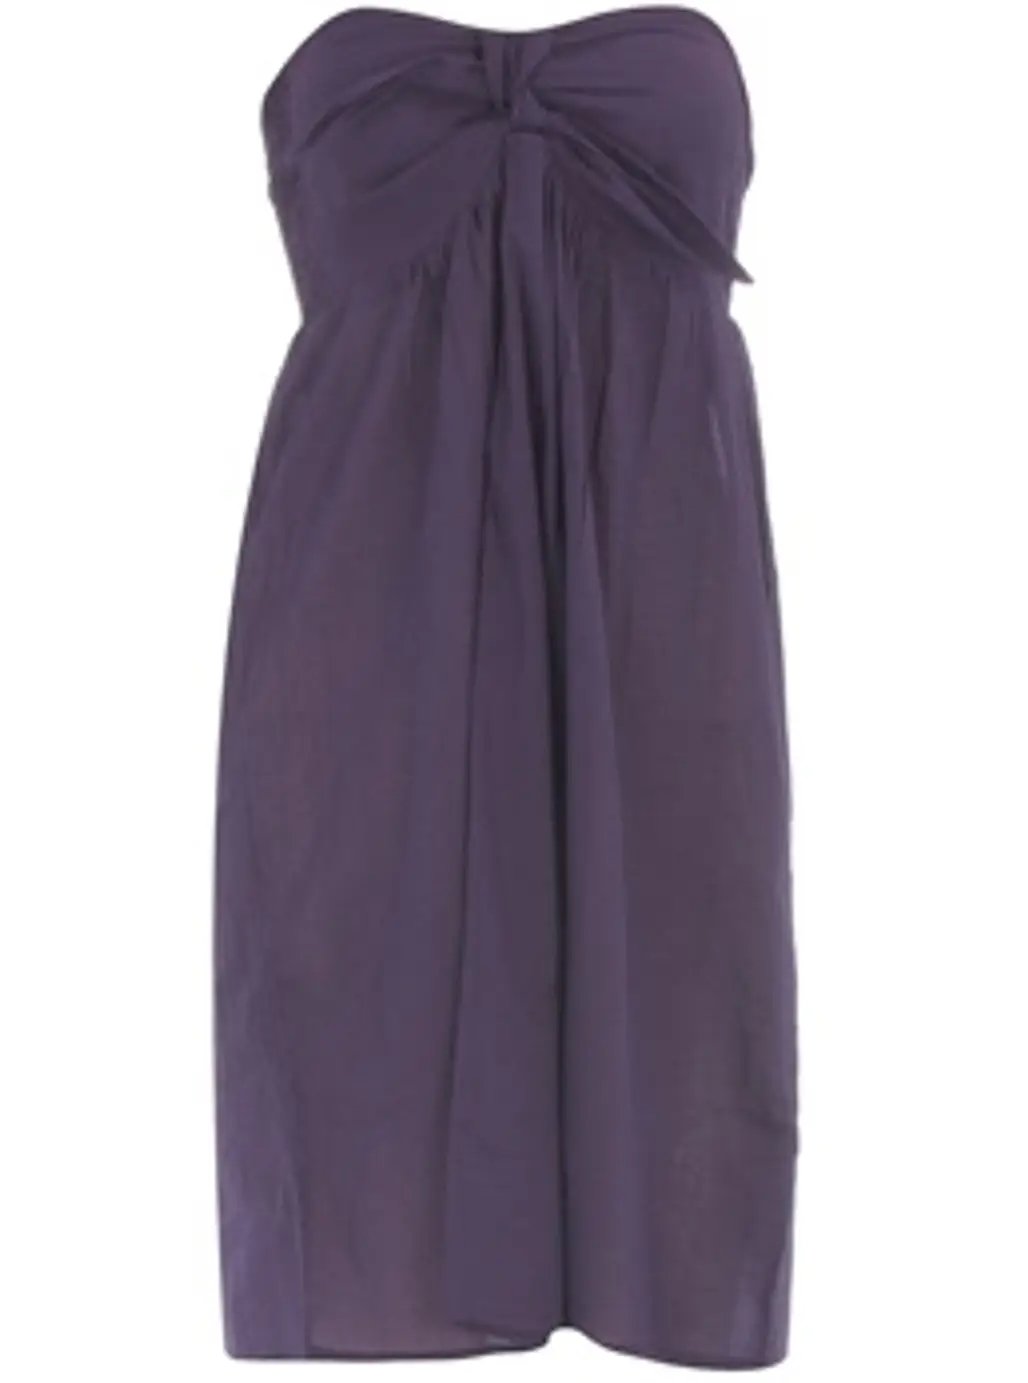 Dorothy Perkins Purple Bow Front Dress